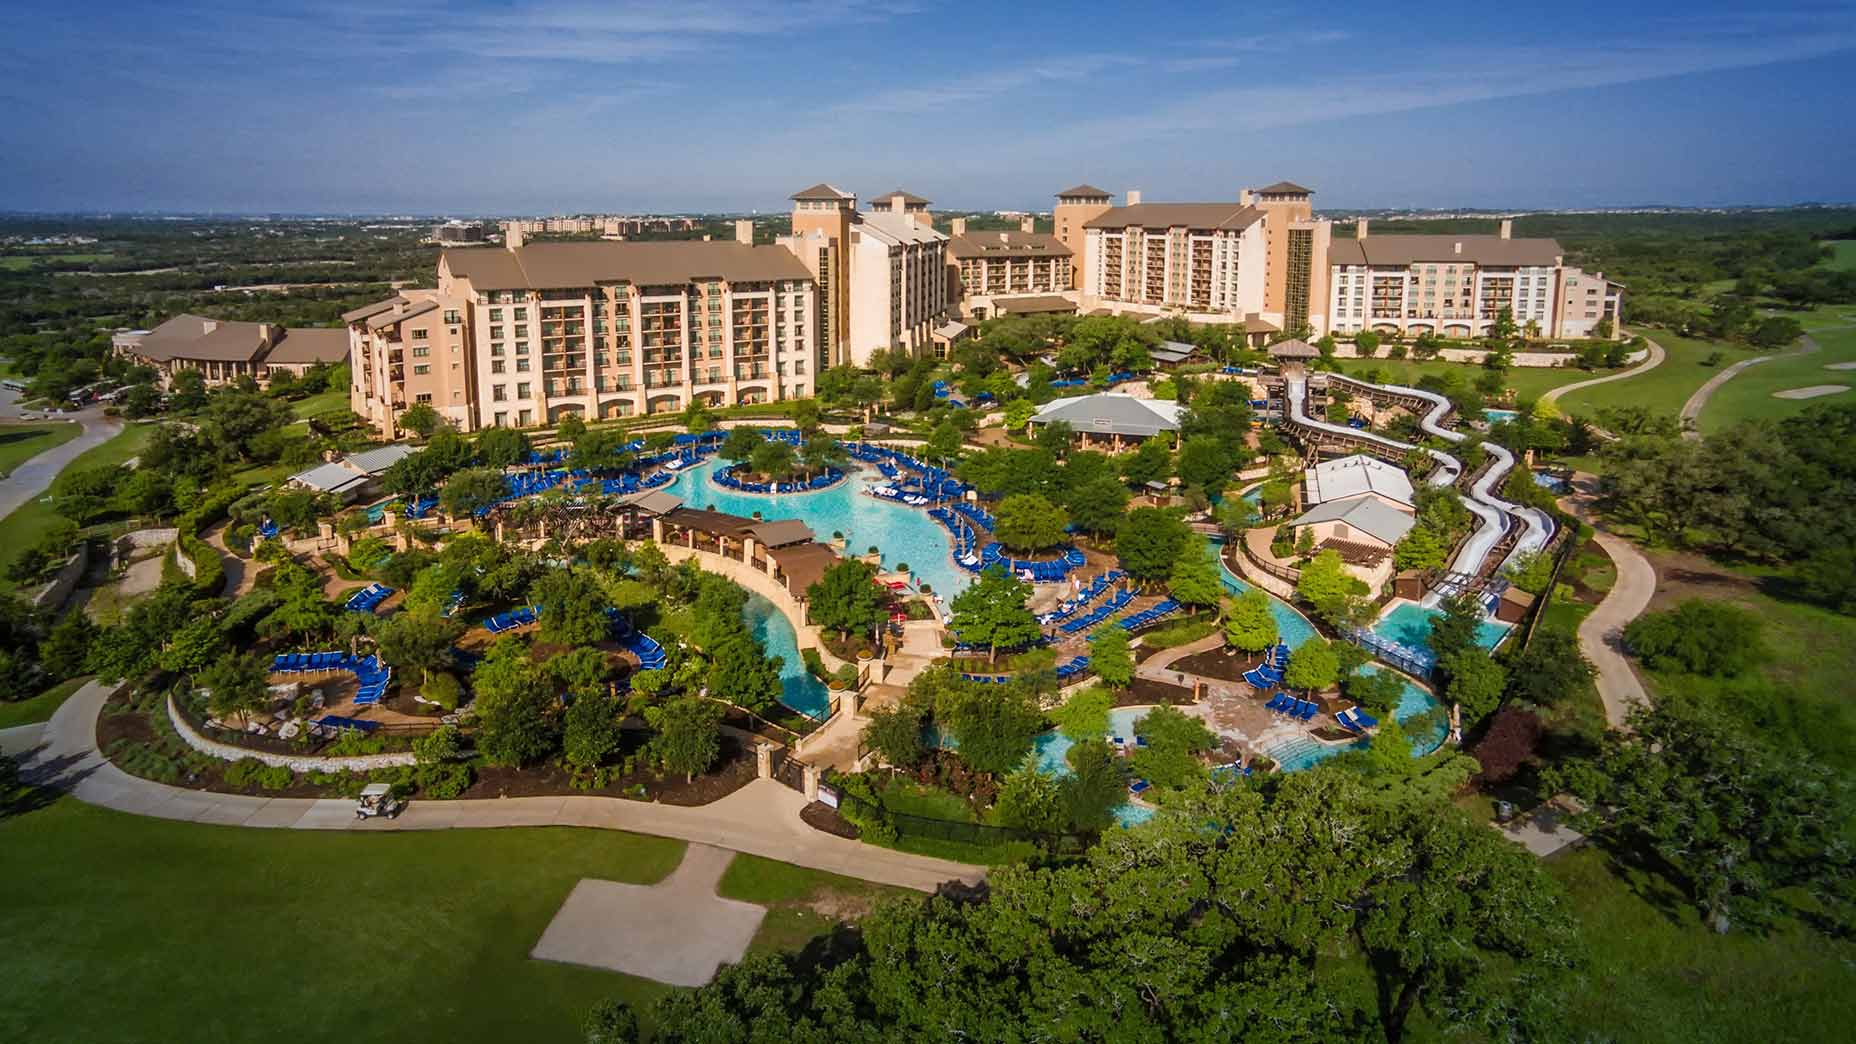 An aerial view of the JW Marriott San Antonio Hill Country Resort & Spa.